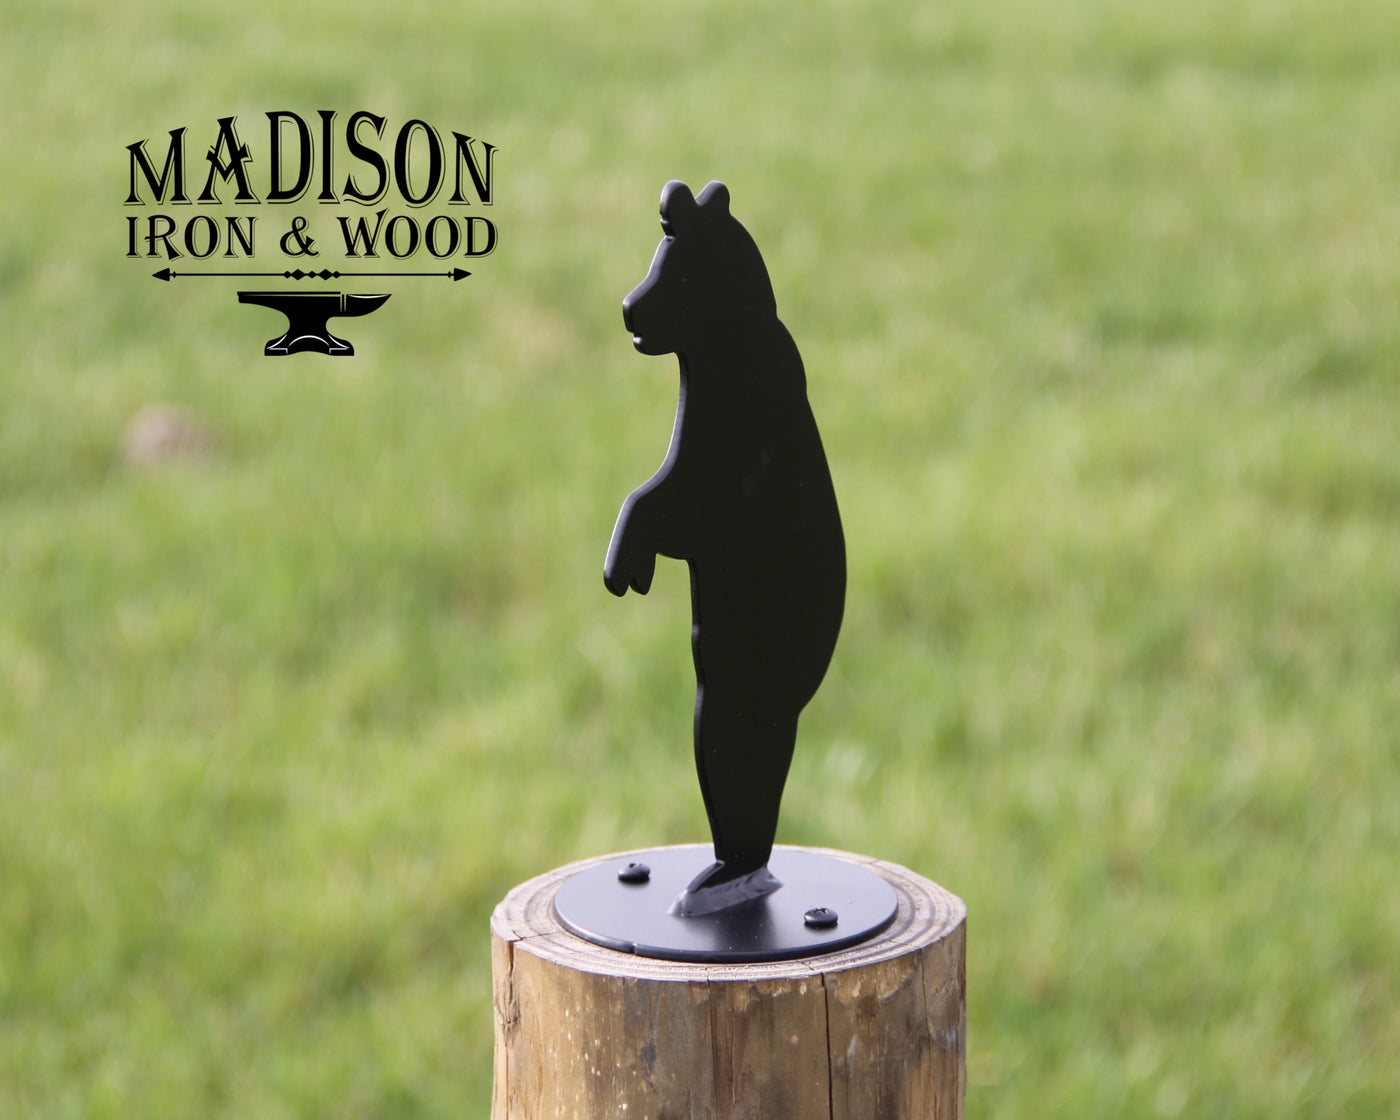 Bear Post Top For Round Wood Fence Post - Madison Iron and Wood - Post Cap - metal outdoor decor - Steel deocrations - american made products - veteran owned business products - fencing decorations - fencing supplies - custom wall decorations - personalized wall signs - steel - decorative post caps - steel post caps - metal post caps - brackets - structural brackets - home improvement - easter - easter decorations - easter gift - easter yard decor